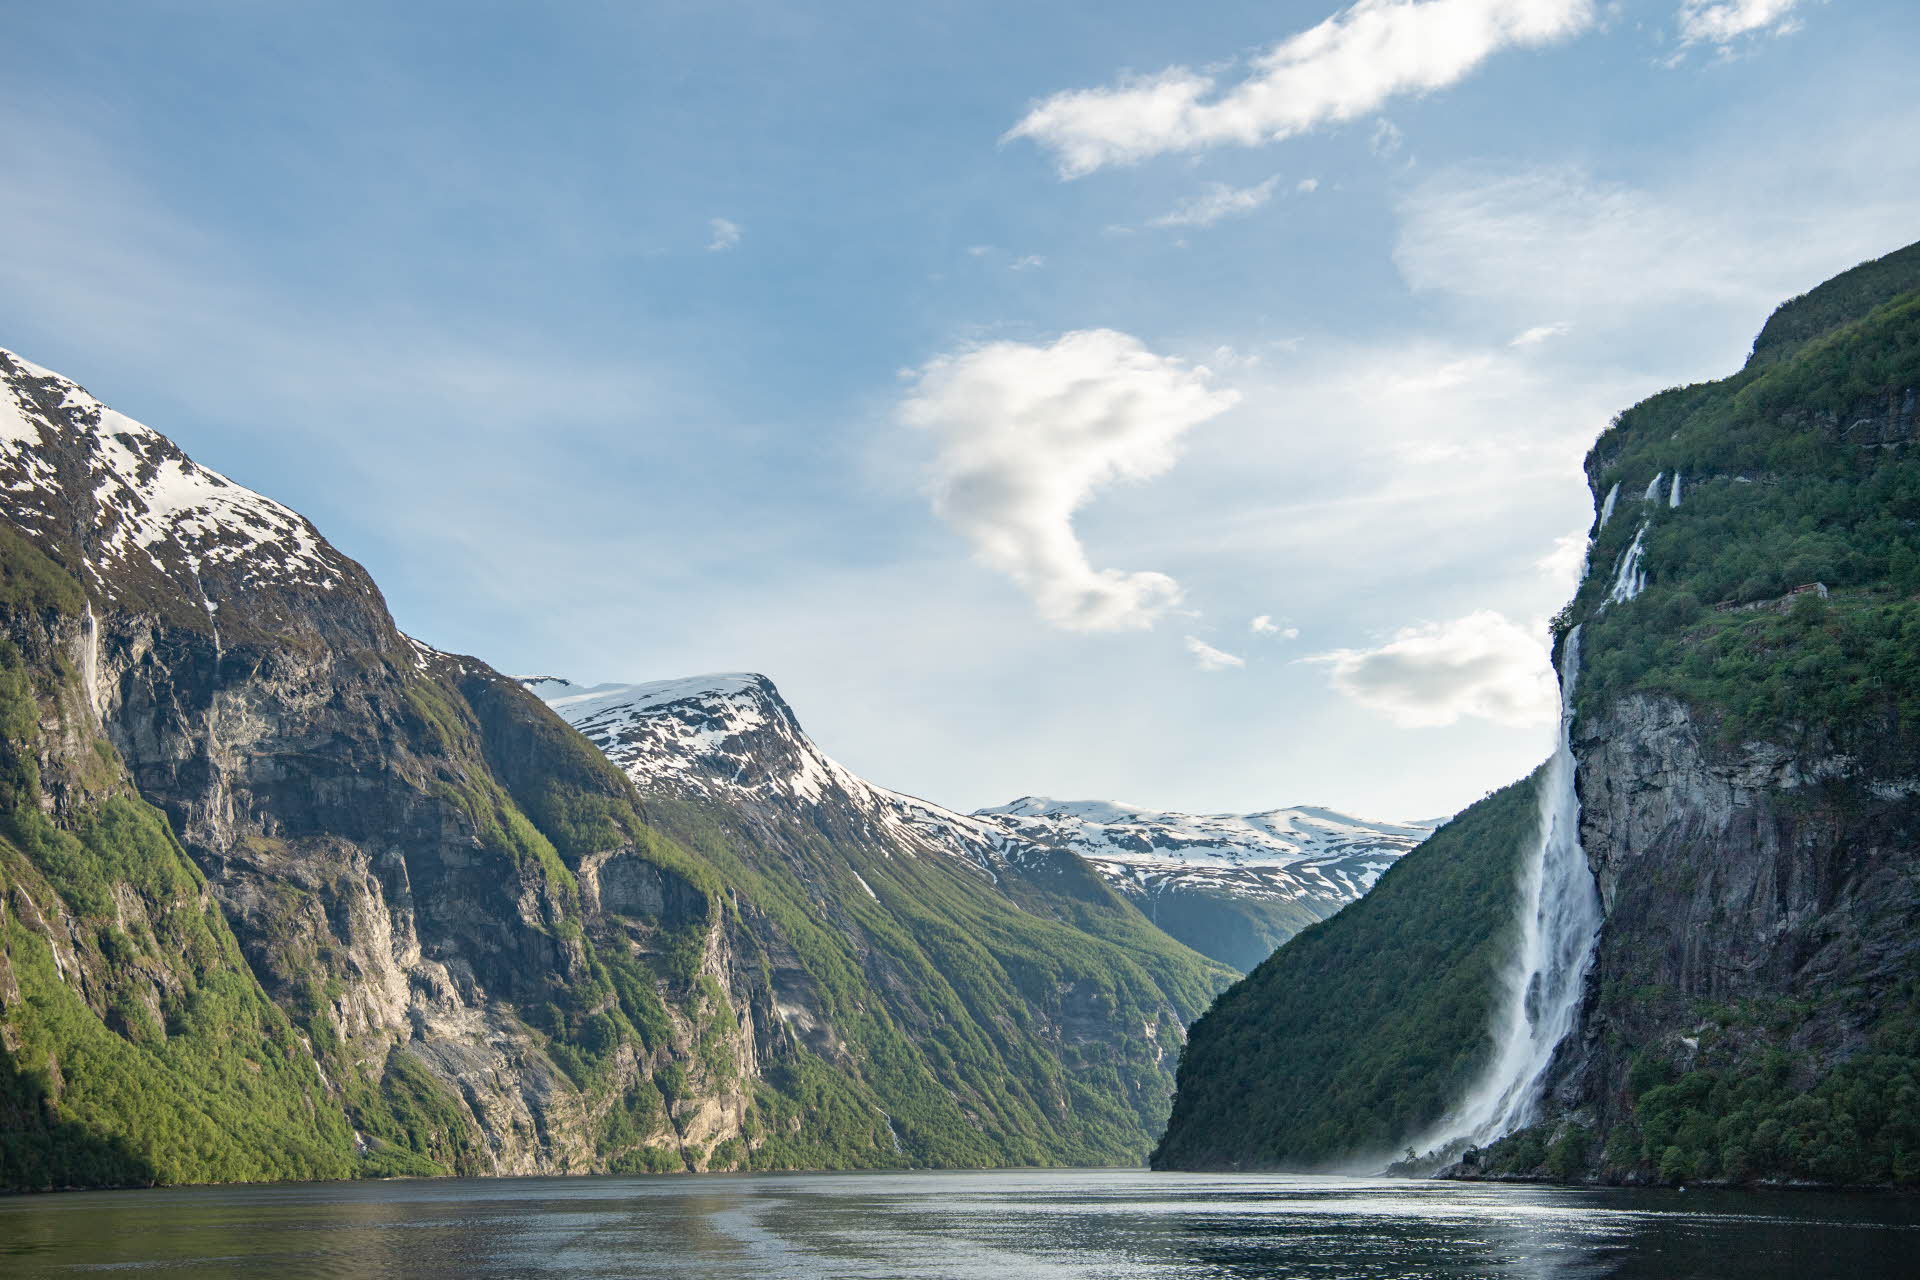 A spring day at the Geirangerfjord, with snow on the mountains and a large waterfall  